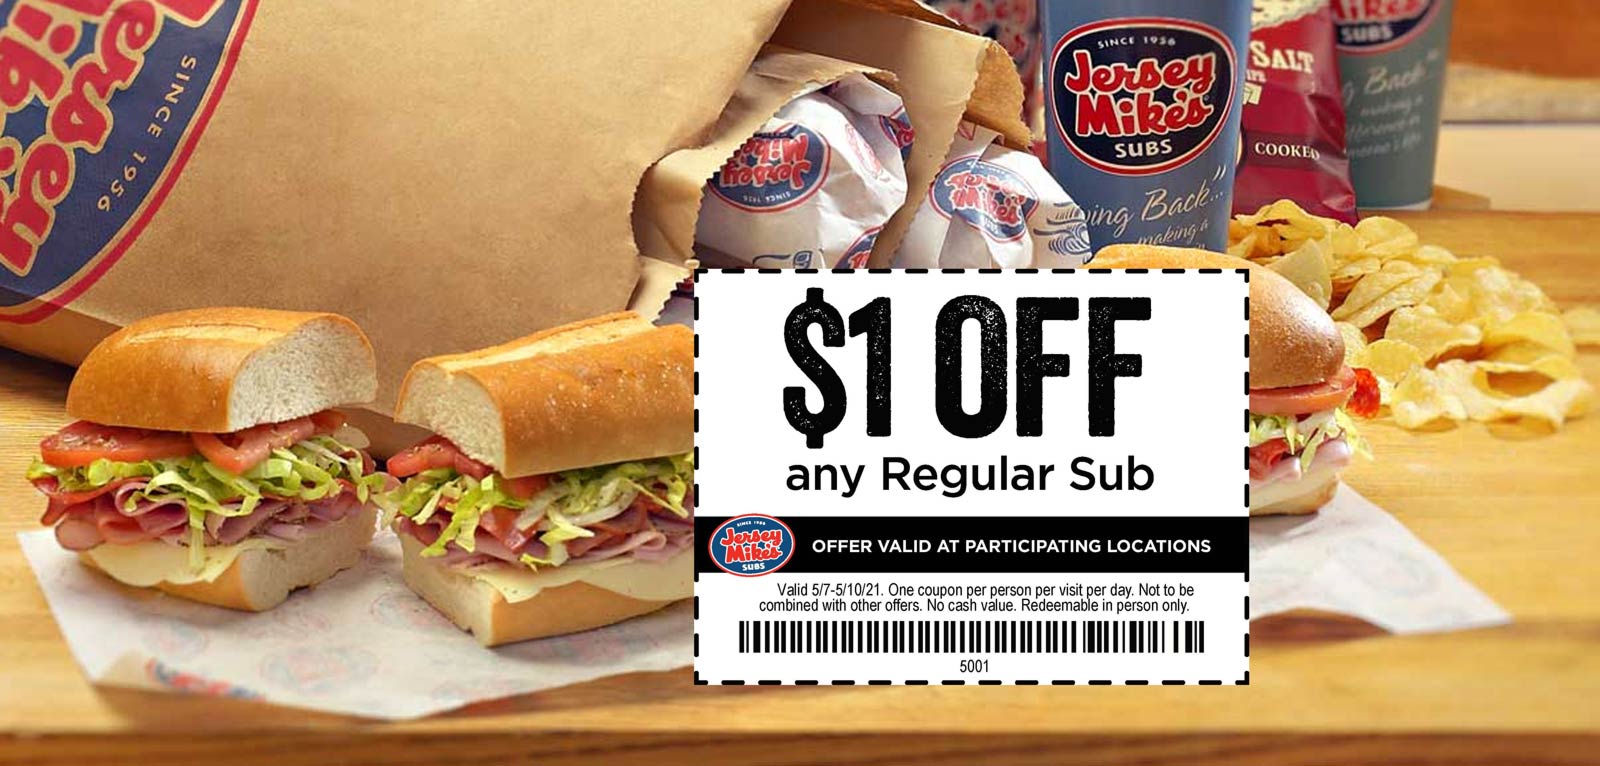 1 off any sub sandwich at Jersey Mikes, or online via promo code MOM 